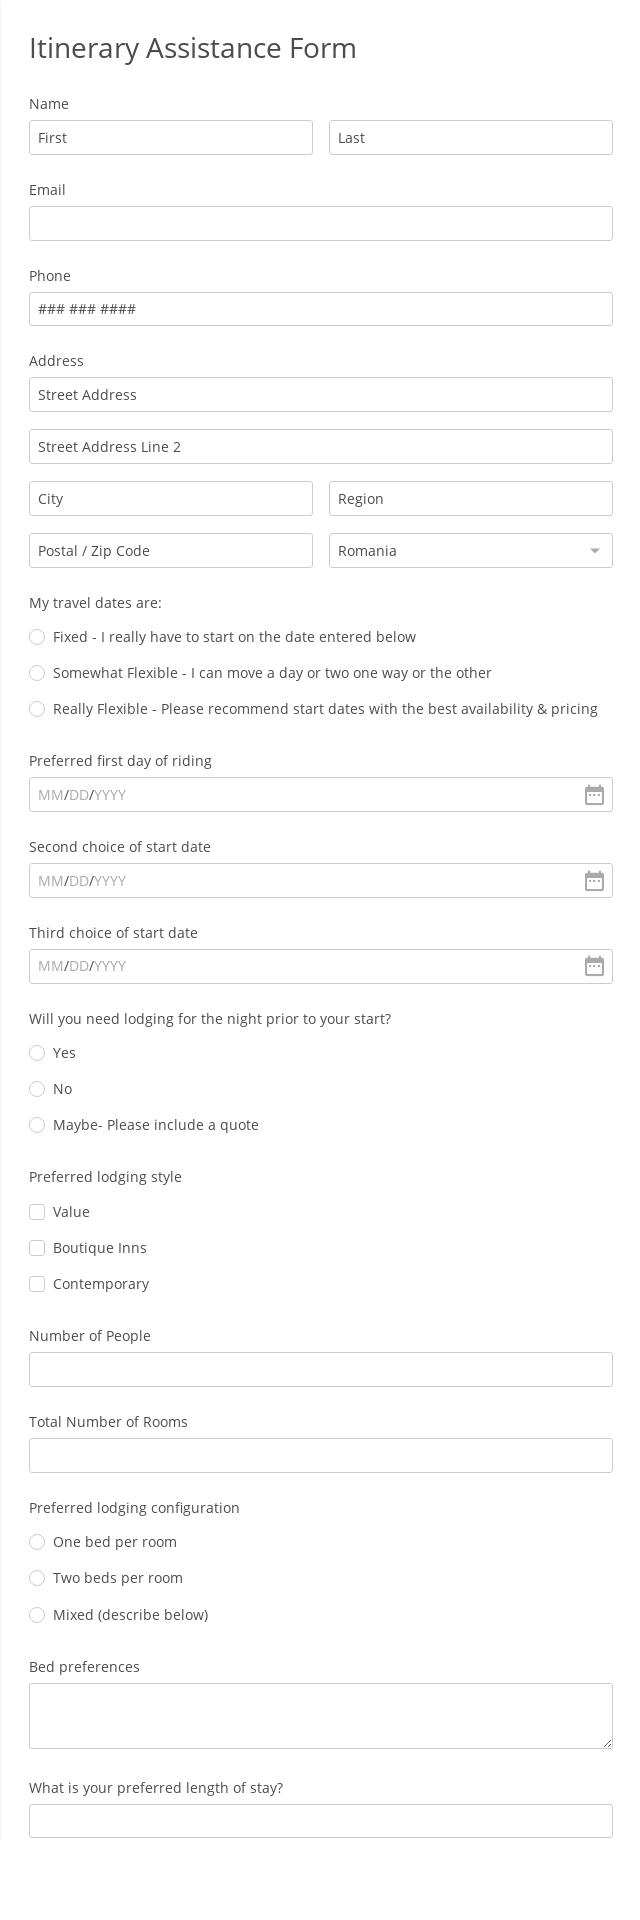 Itinerary Assistance Form